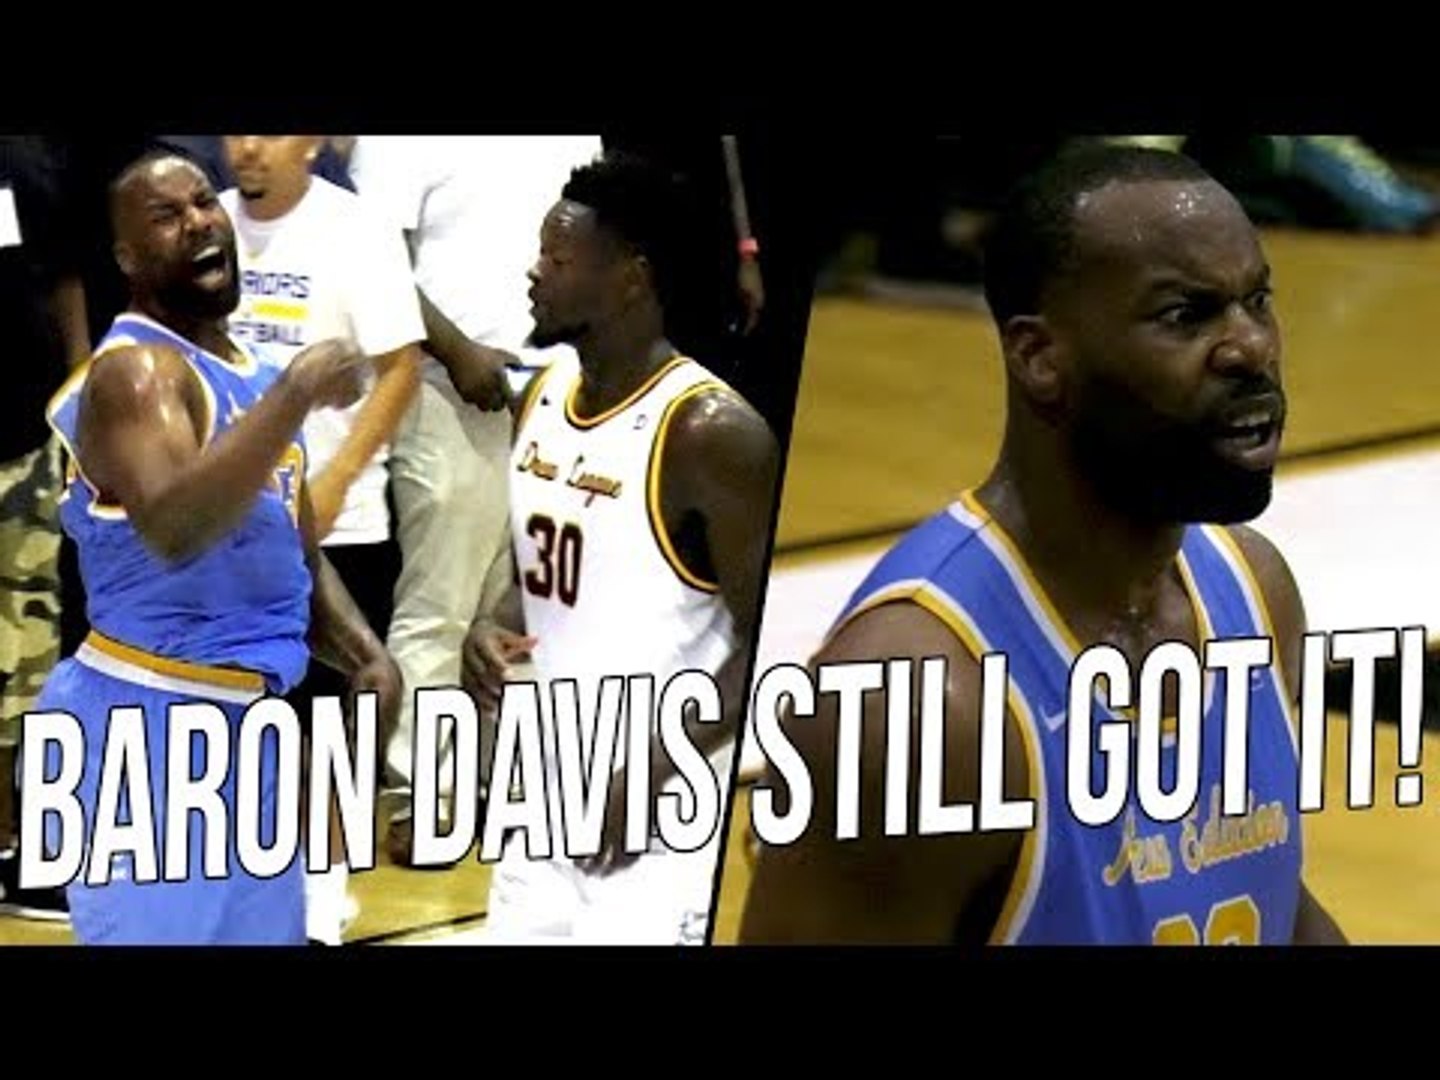 â�£Baron Davis Goes AT Nick Young! Shows He Still Got HANDLES at Drew League